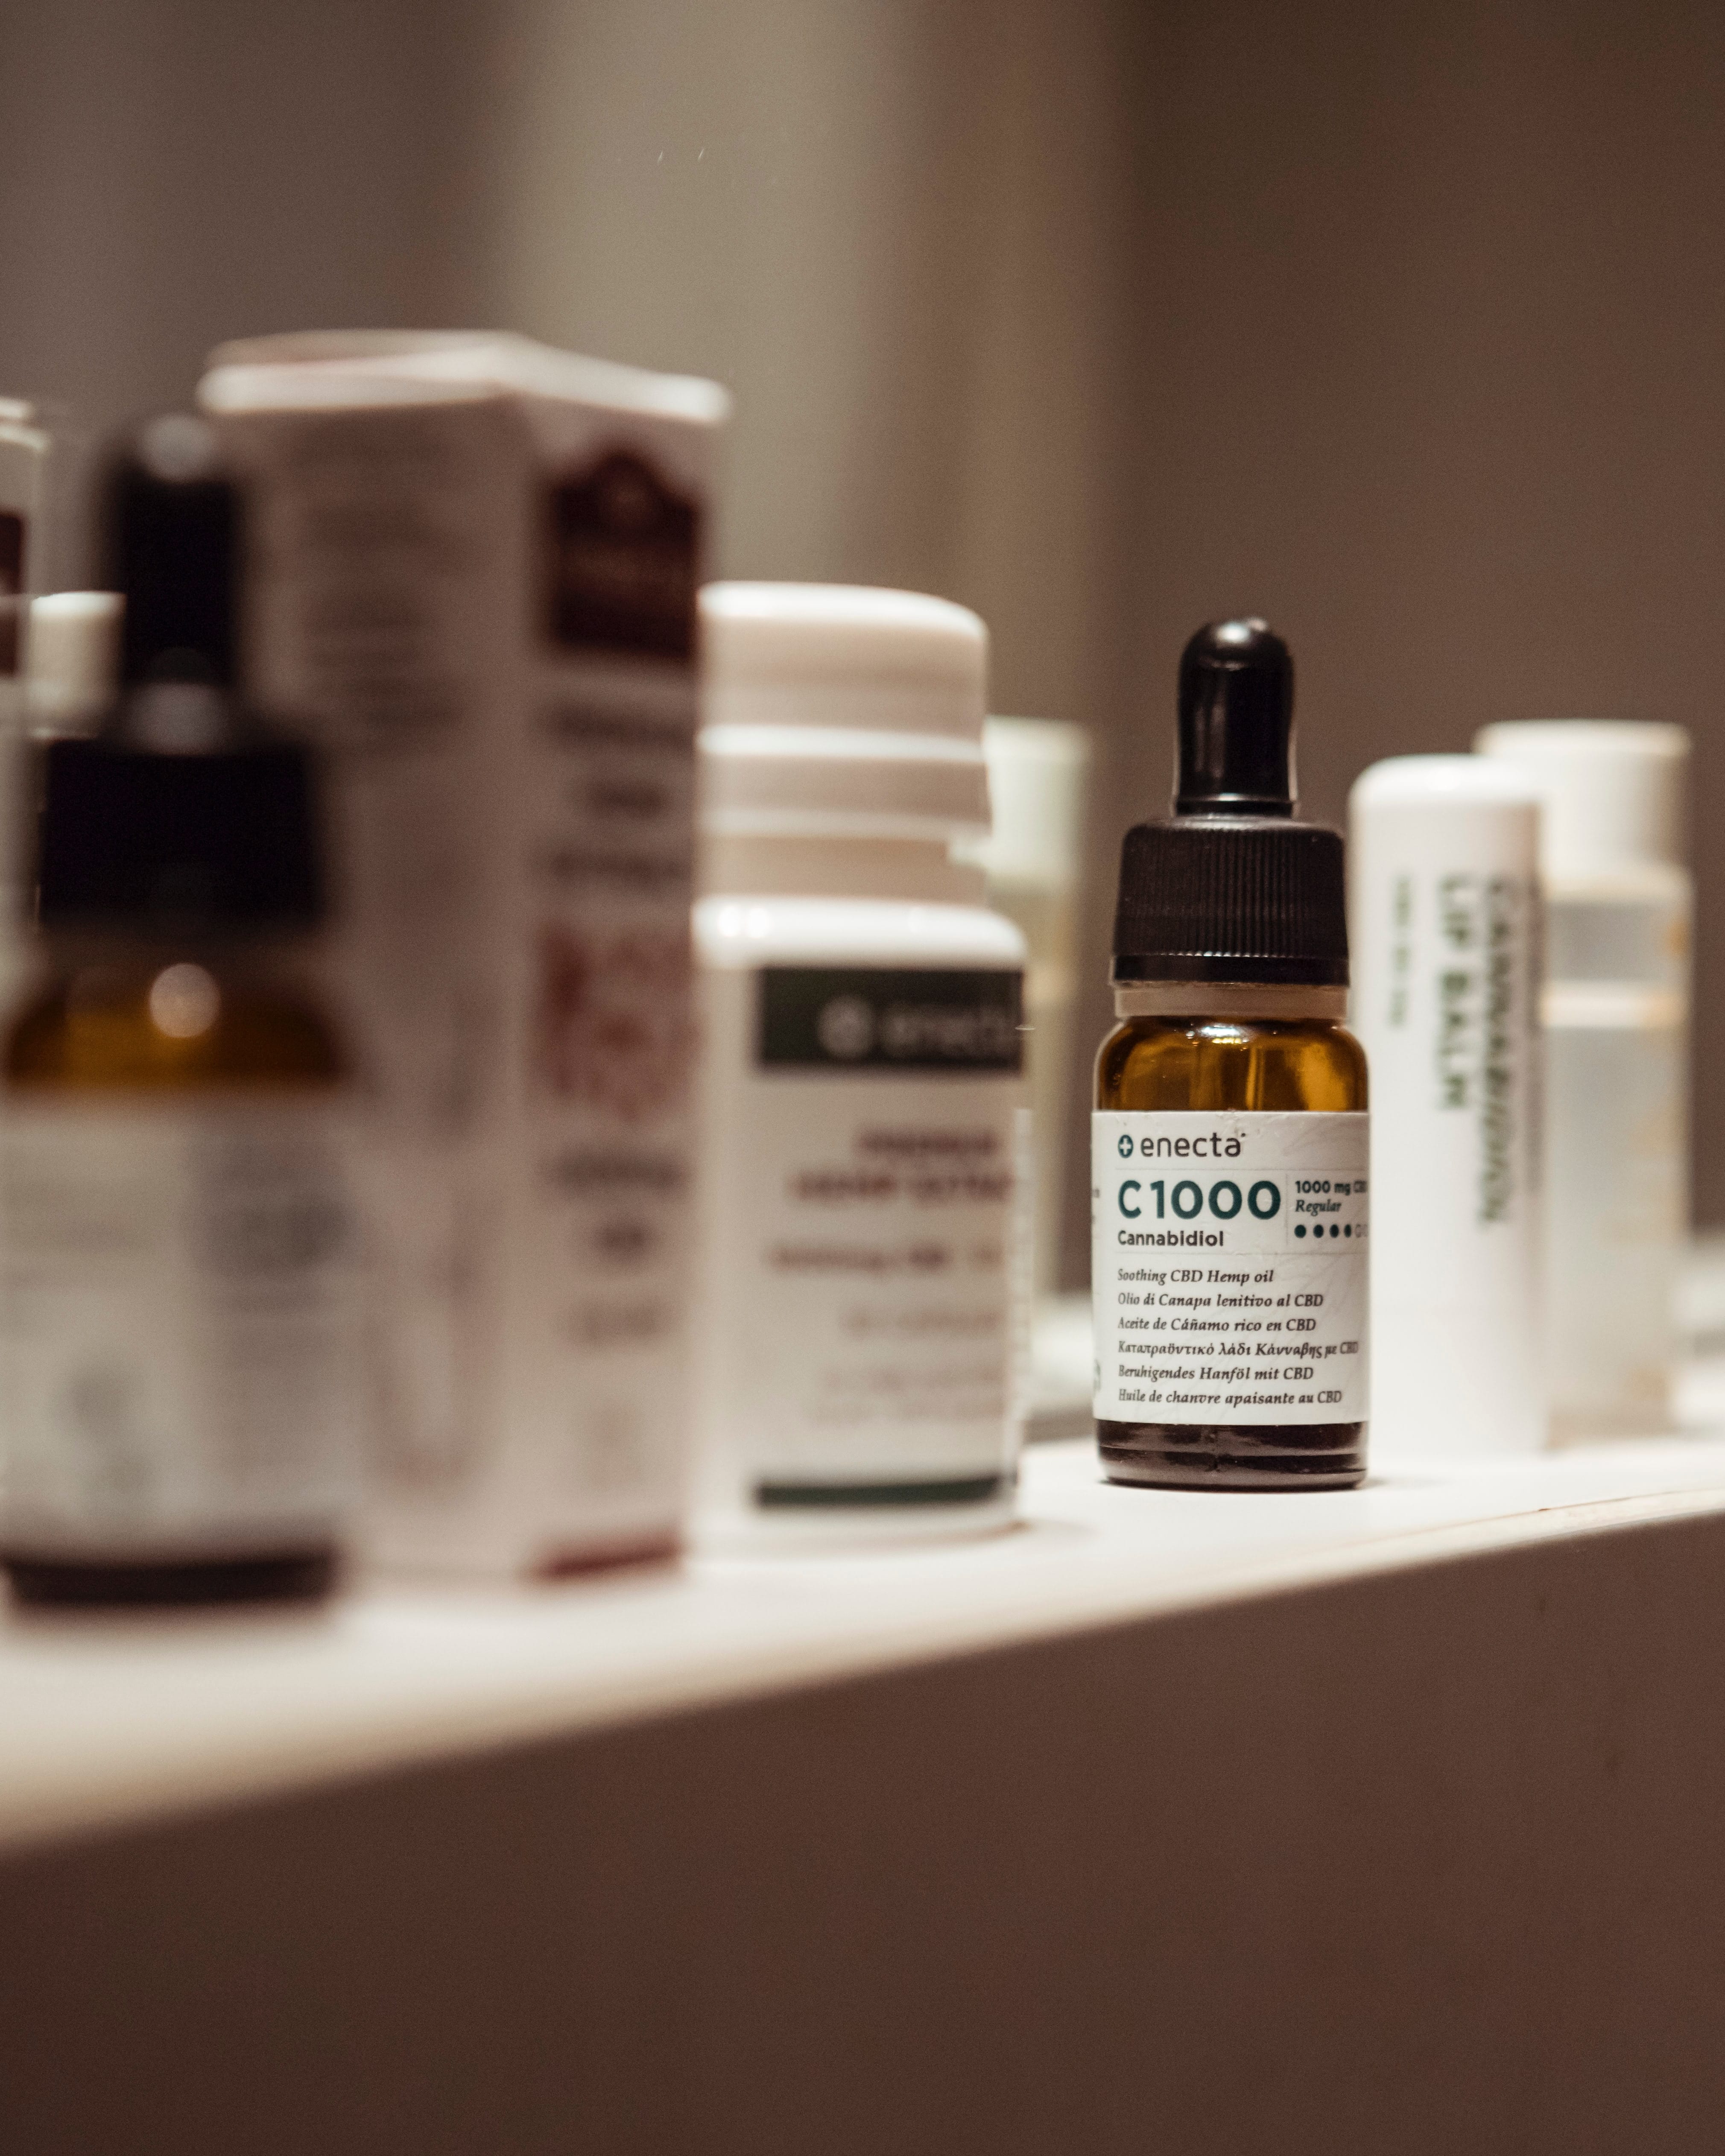 Shelf with bottles of medicine in soft focus and a bottle of CBD oil in clear focus; image by Francesco Mazzone, via Unsplash.com.